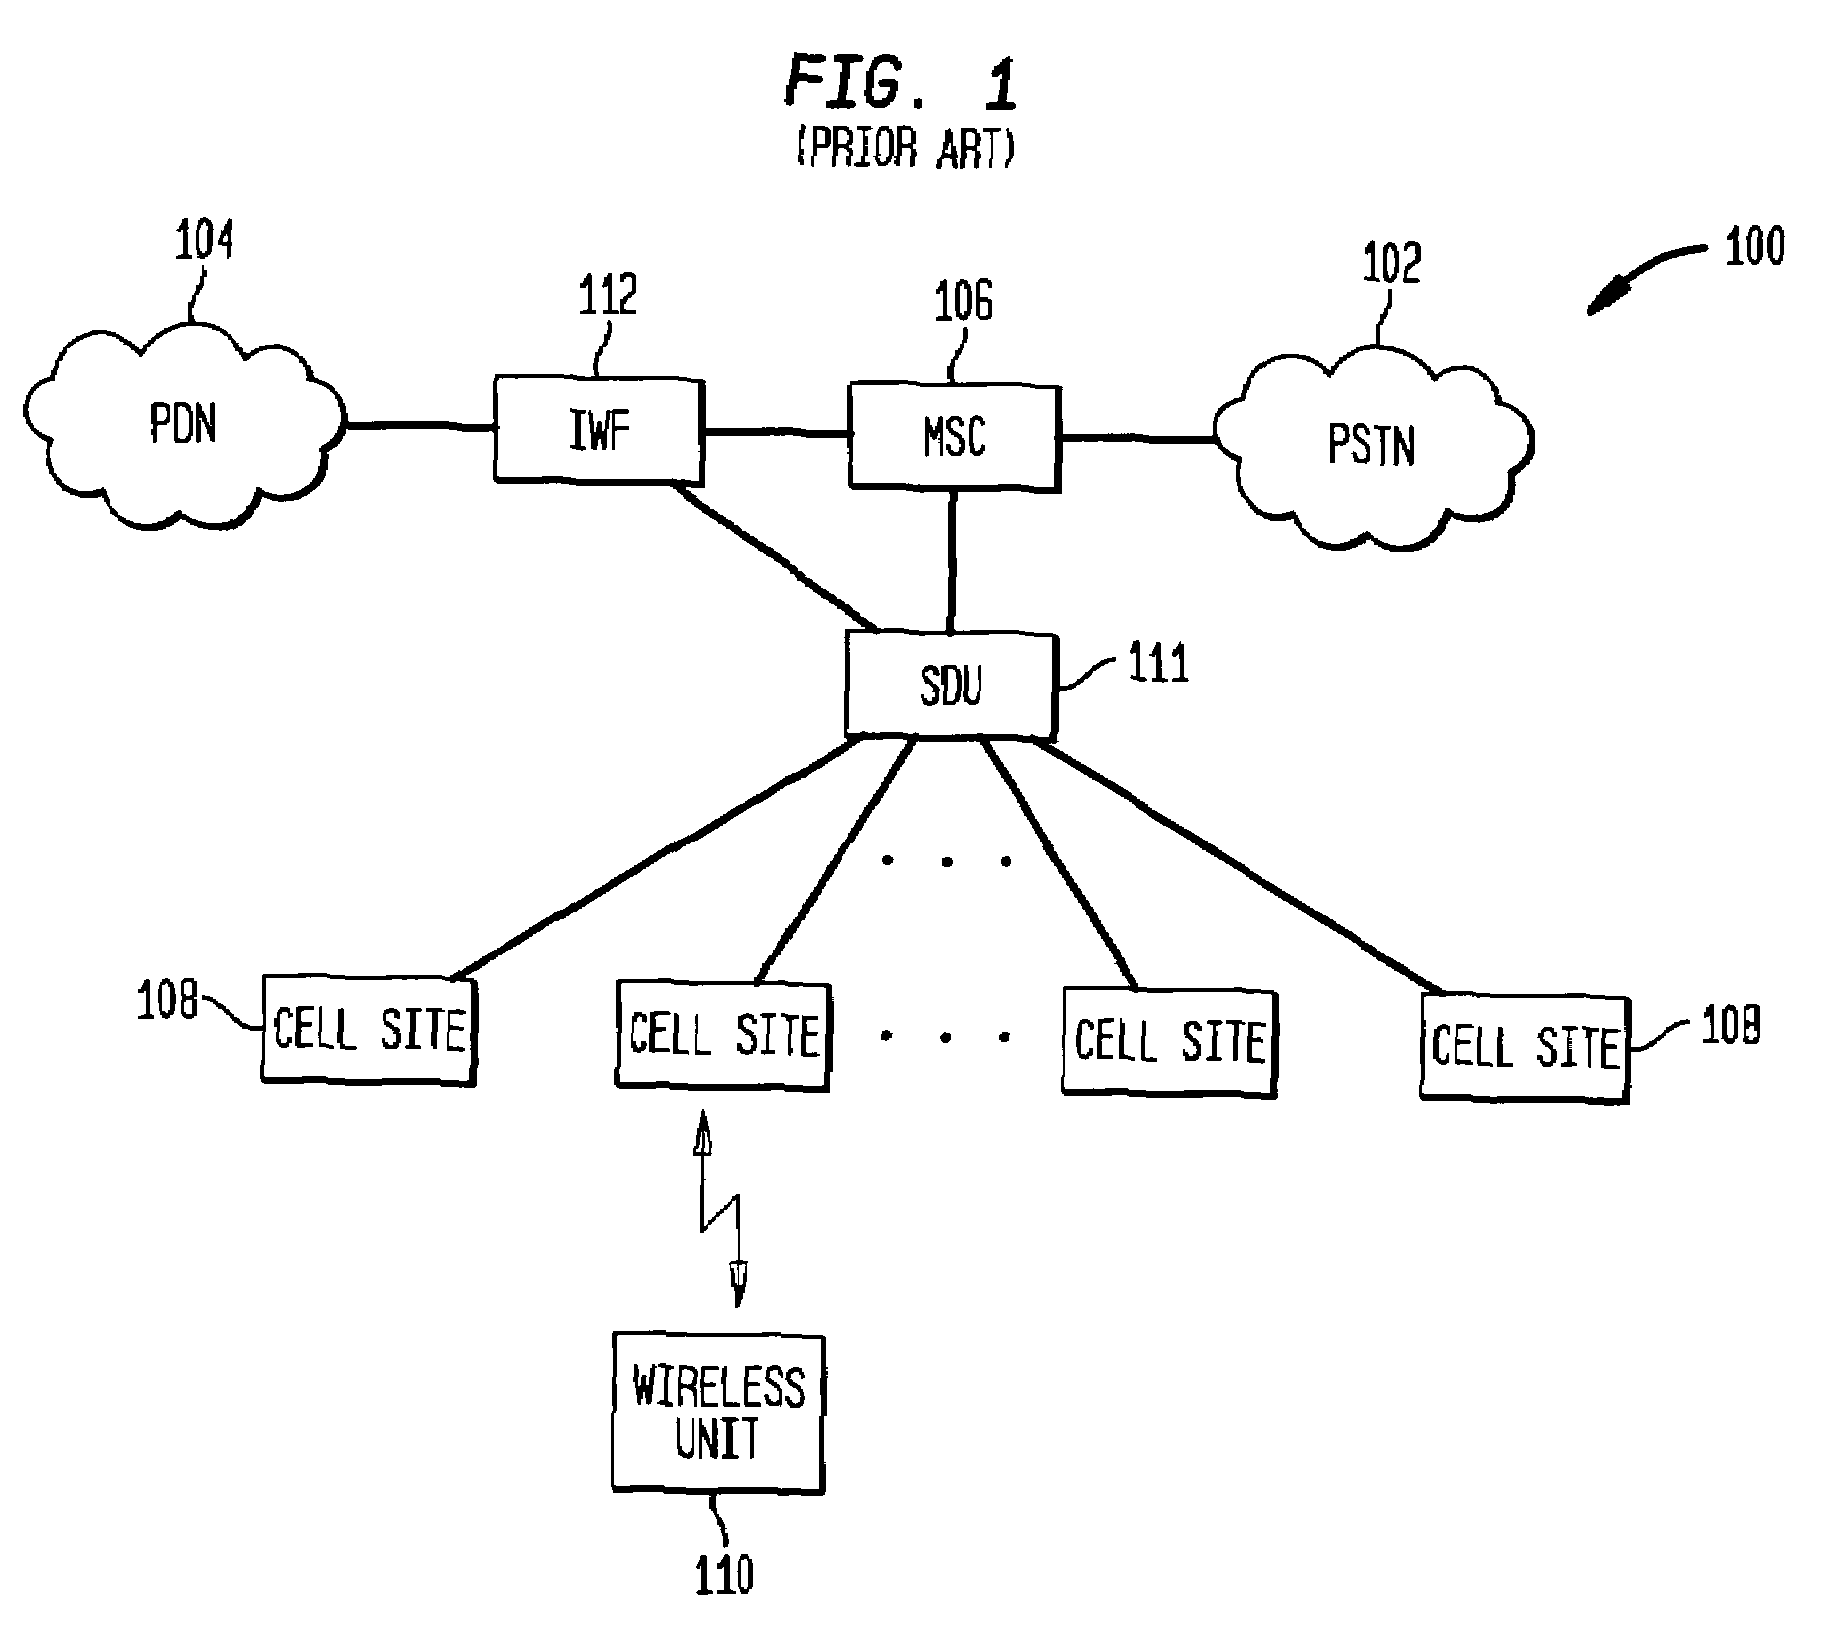 Data session setup system for wireless network